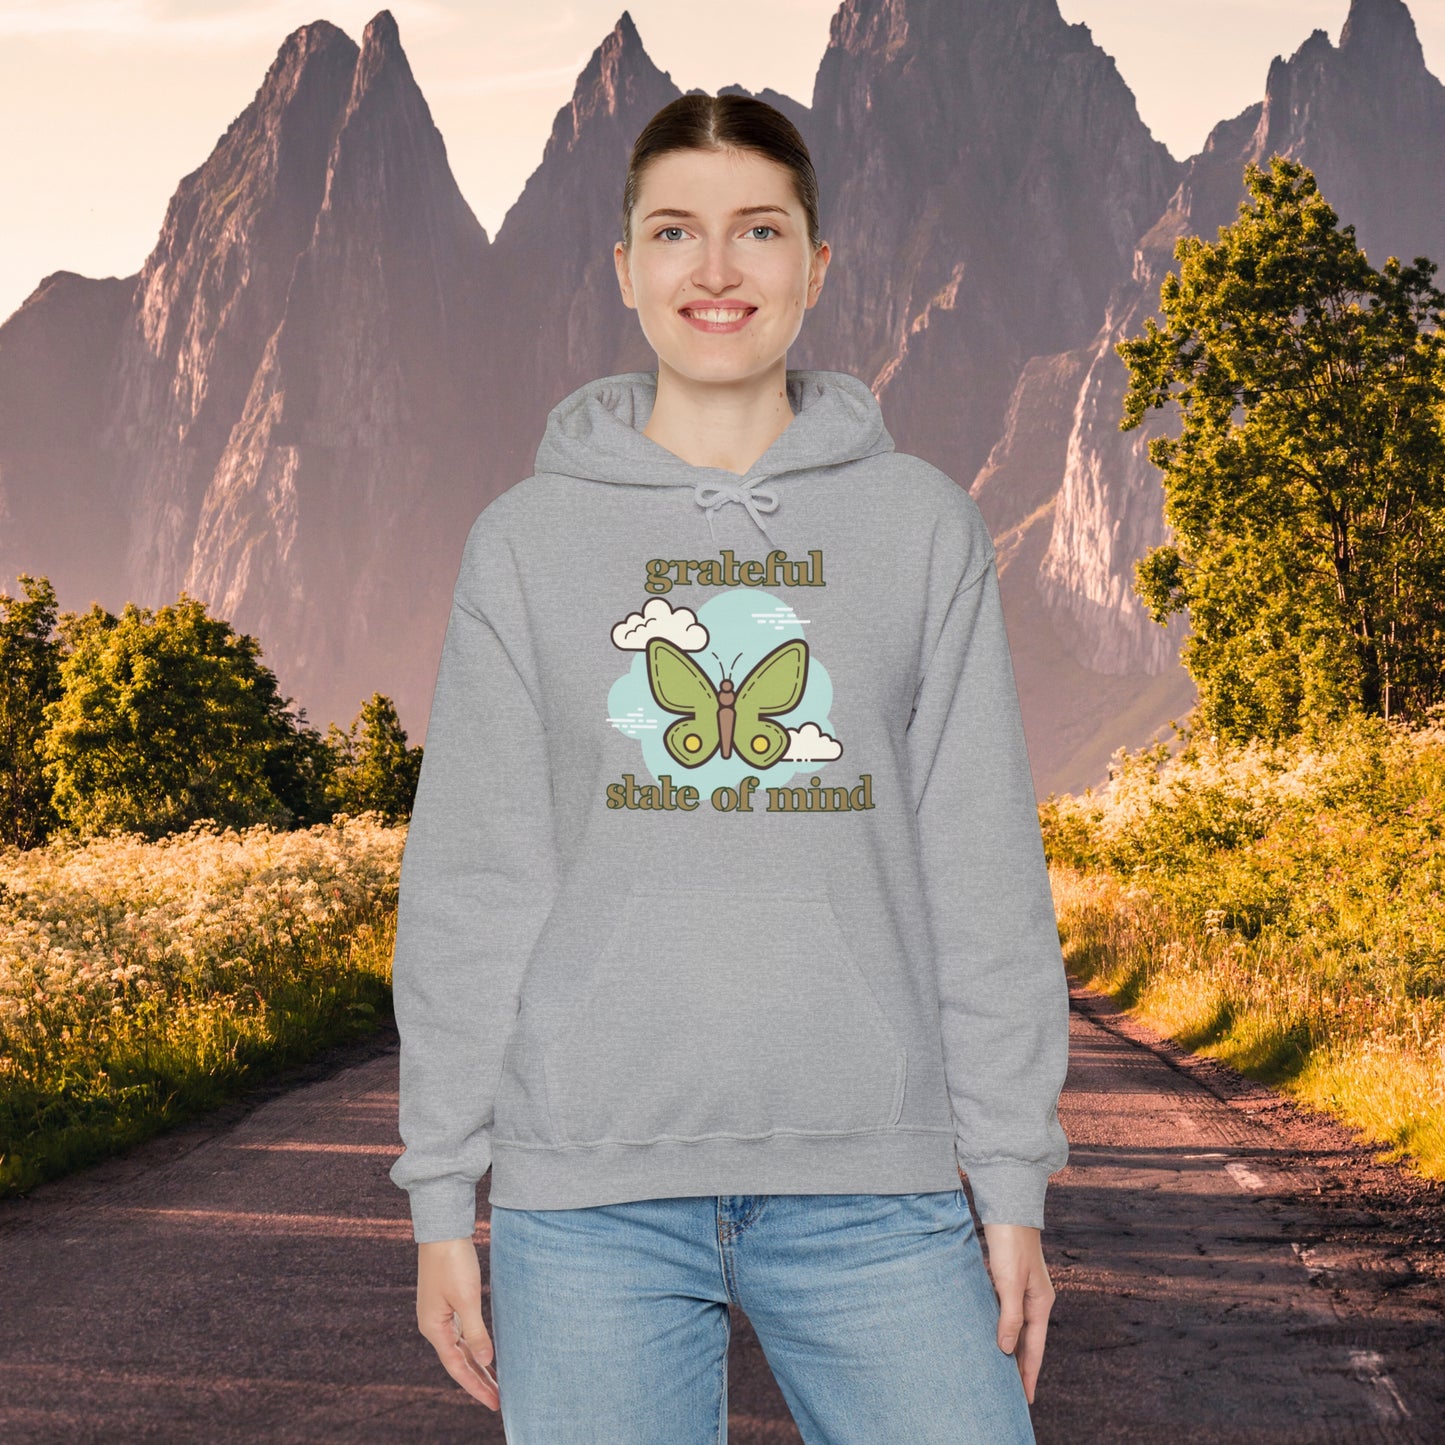 Grateful state of mind around a simple butterfly design on this Unisex Heavy Blend™ Hooded Sweatshirt